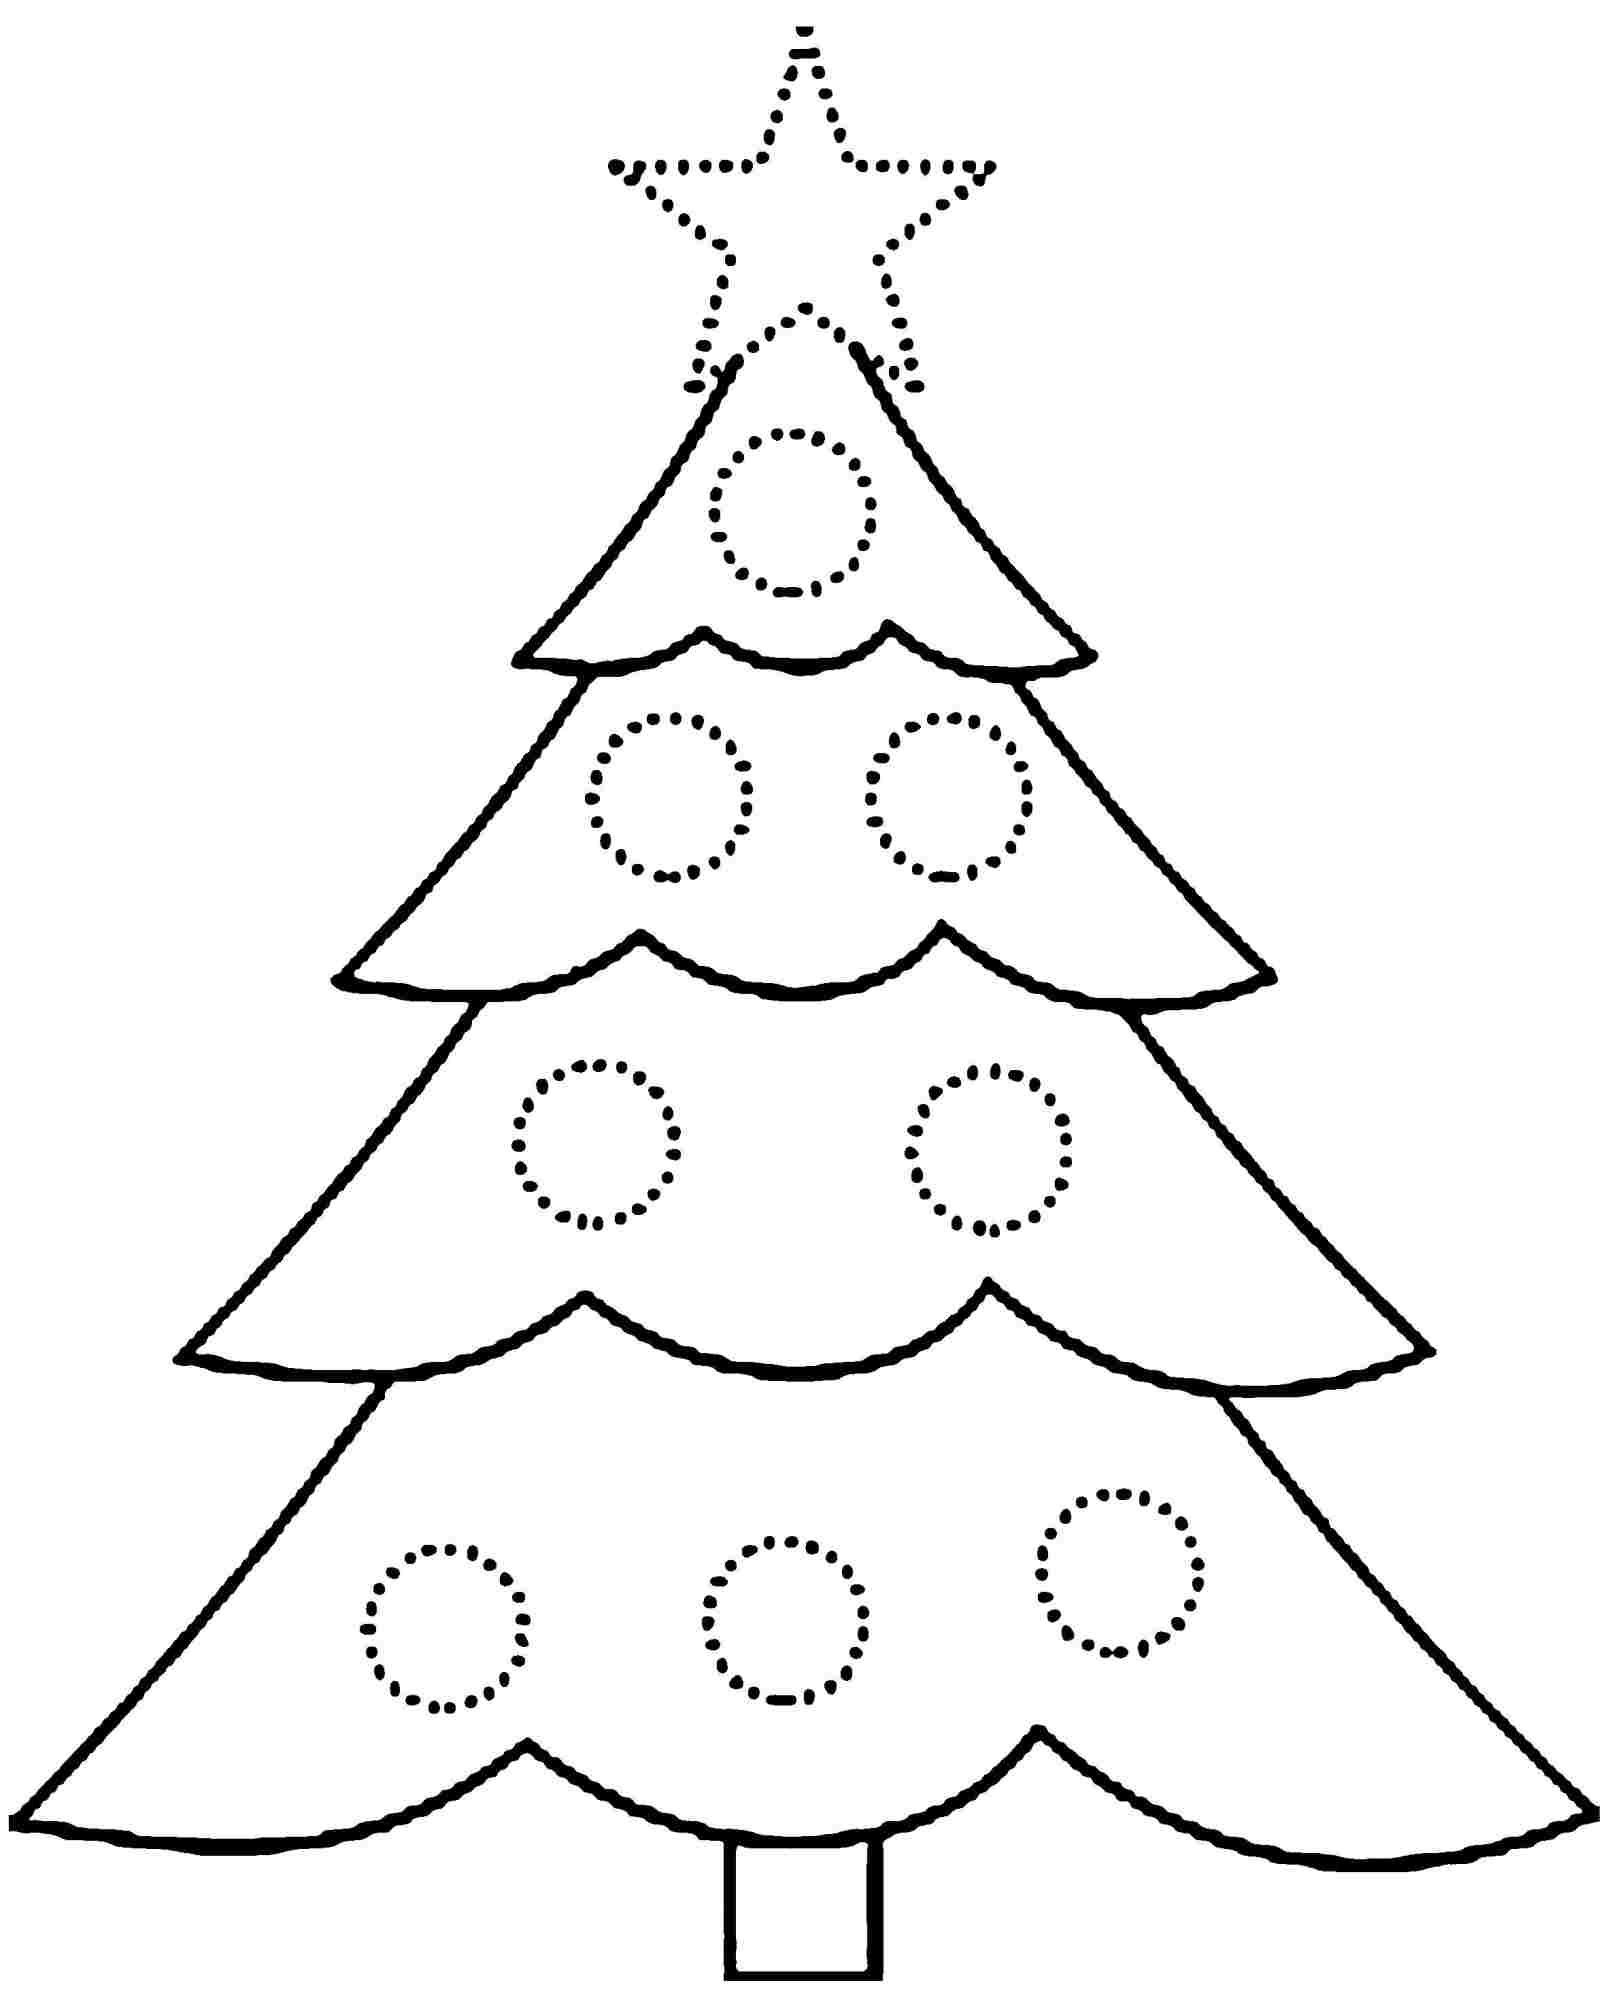 Christmas Coloring Pages For Preschoolers | Holiday Coloring Pages - Free Printable Christmas Tree Ornaments Coloring Pages